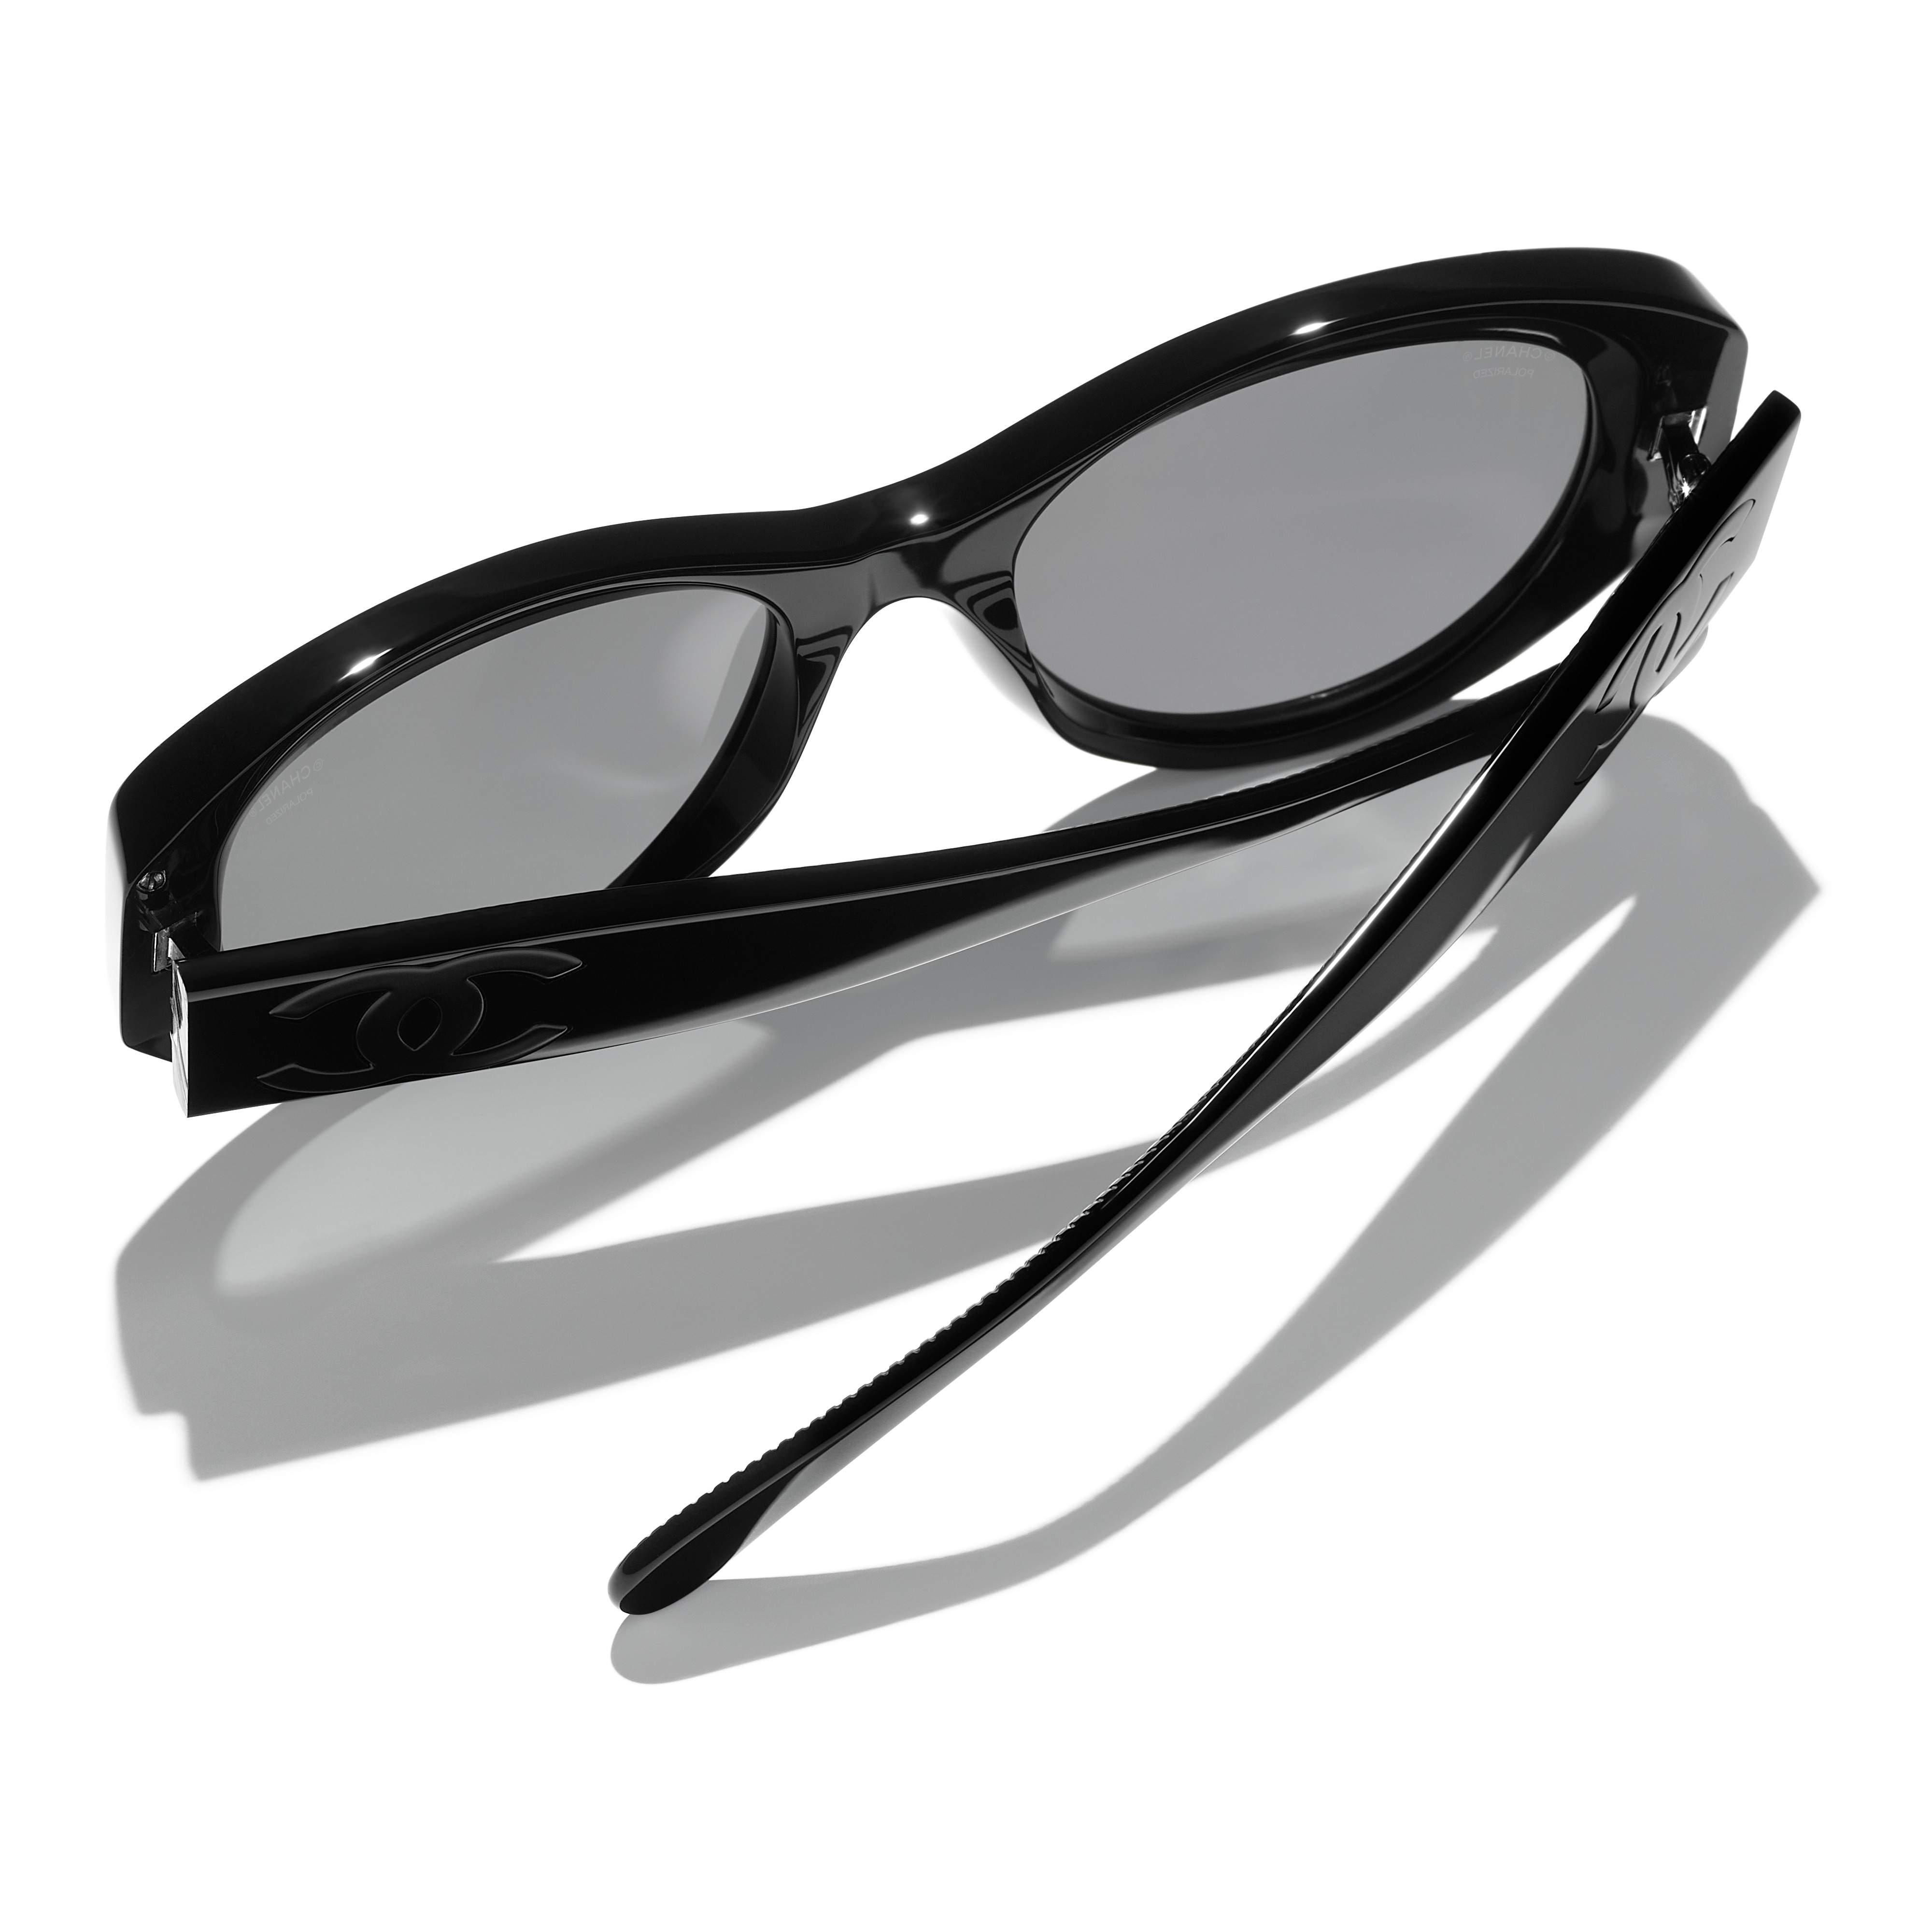 Sunglasses CHANEL CH5494 C888S4 53-18 Black in stock | Price 258,33 € |  Visiofactory